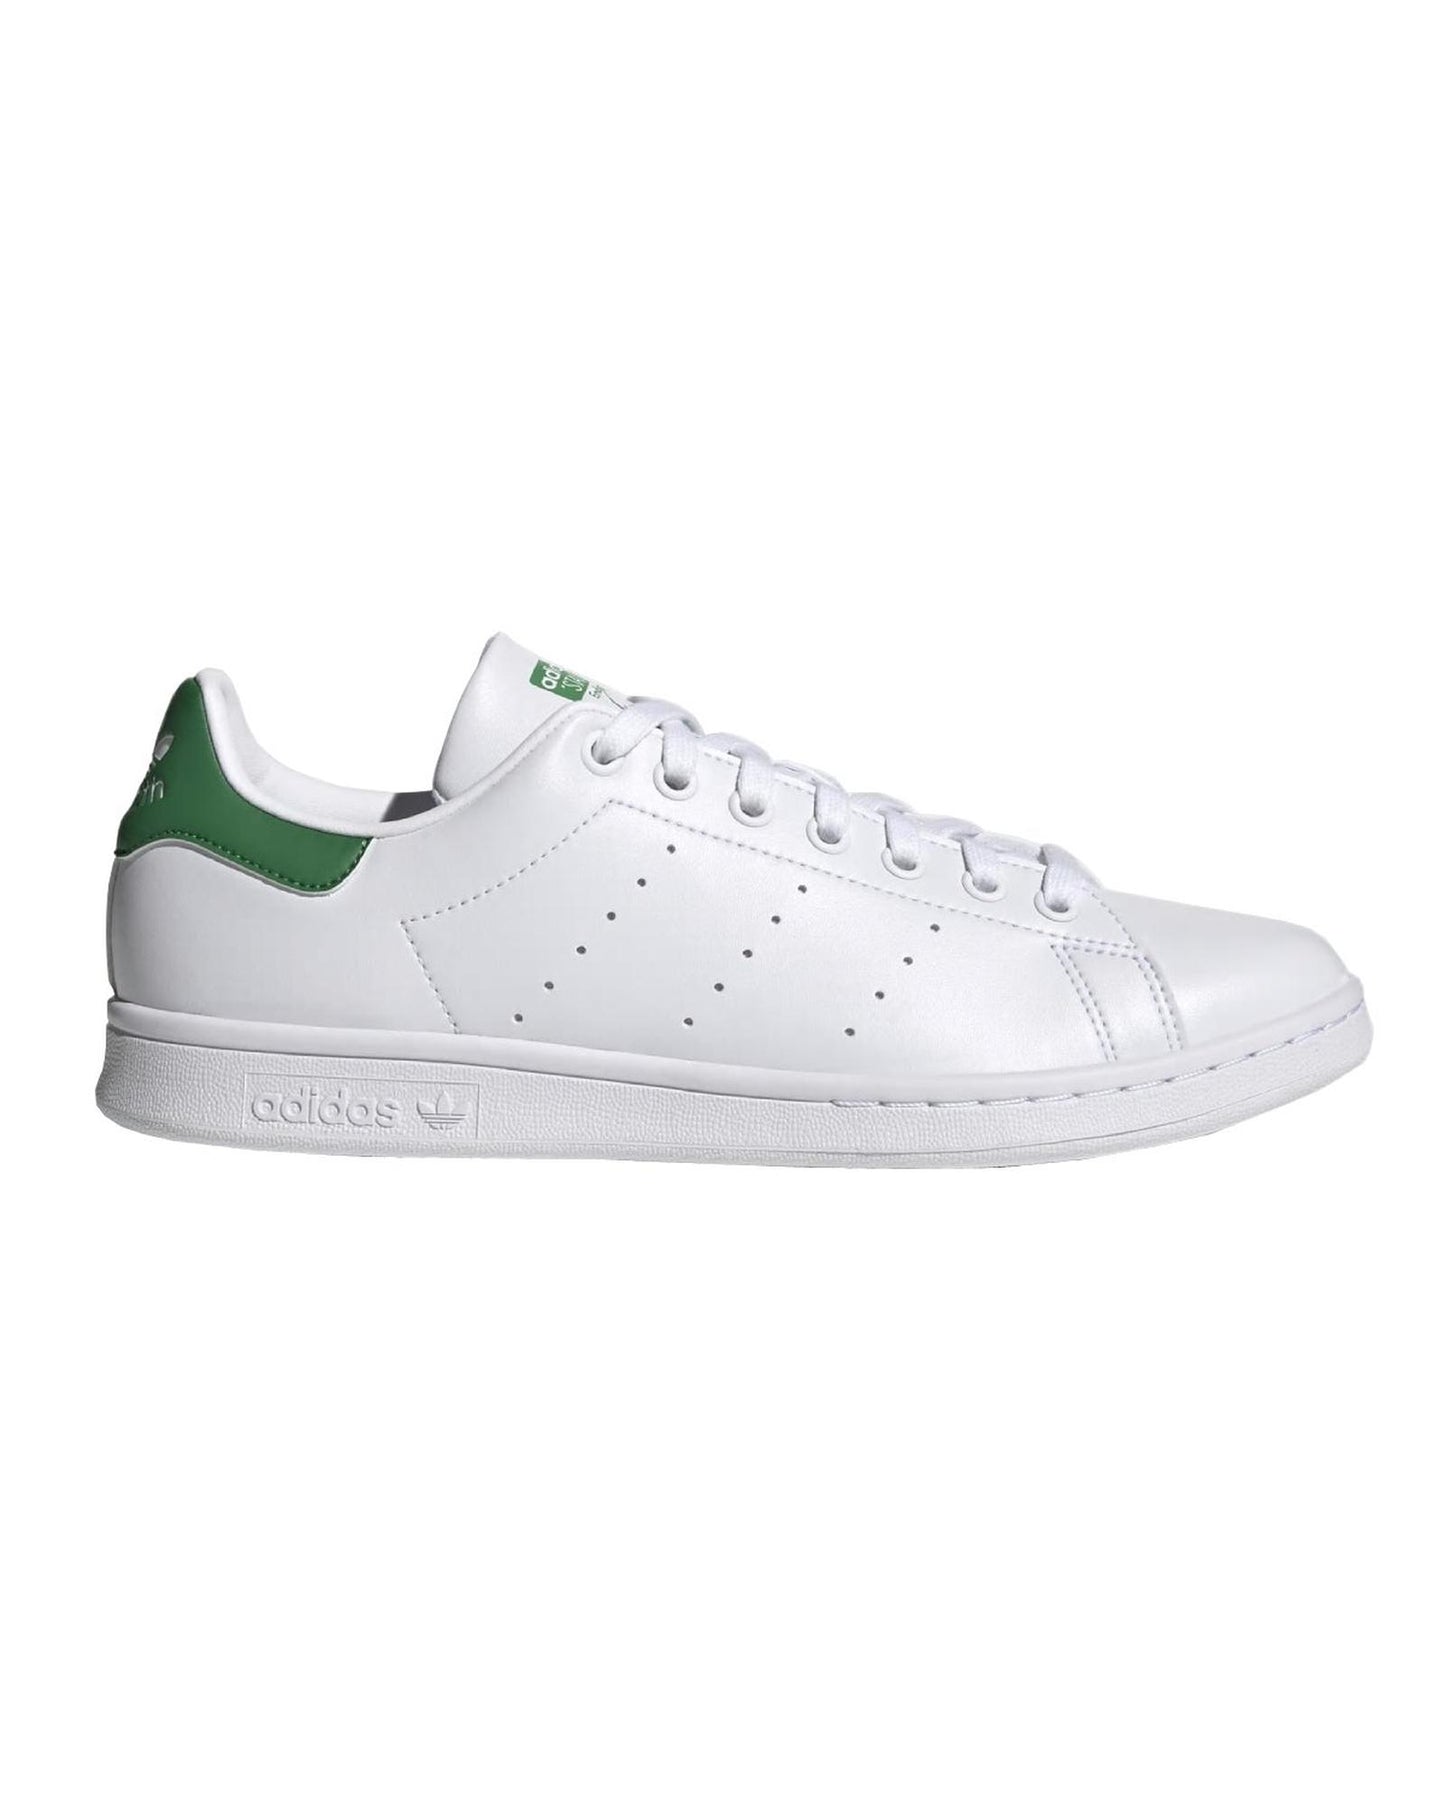 Classic Vegan Stan Smith Casual Shoes - 13 US